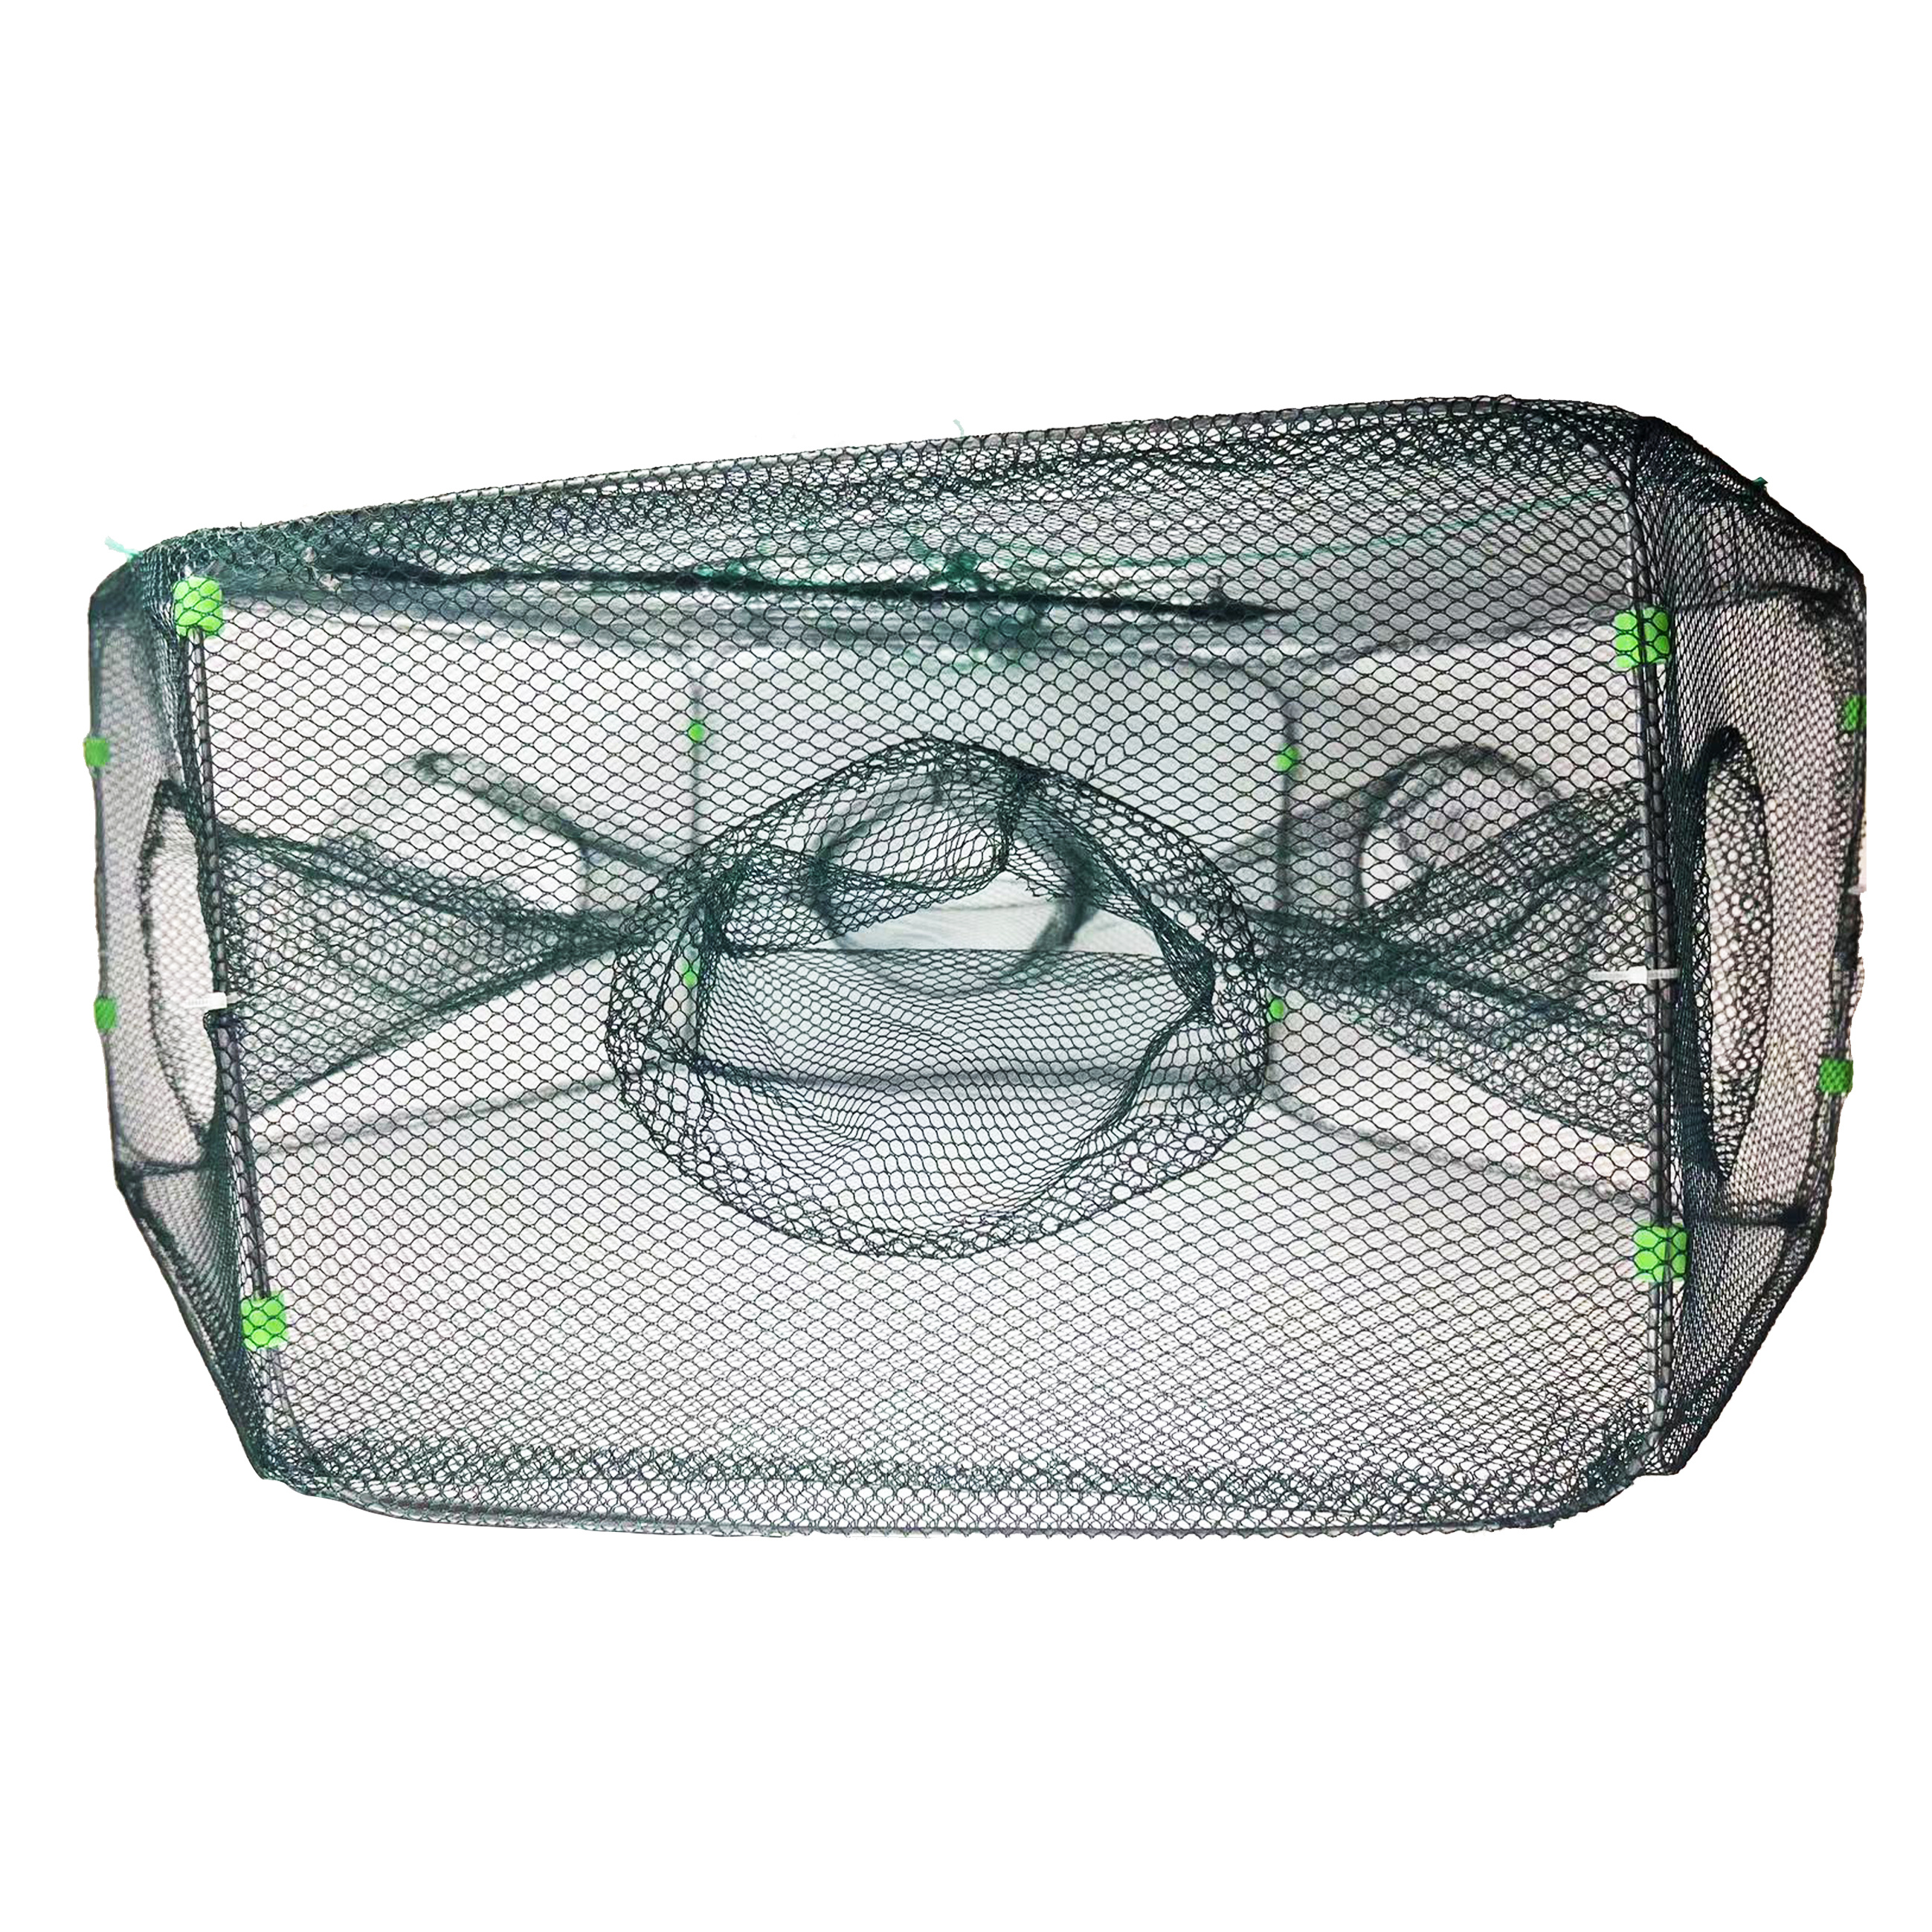 Big Foldable Fishing Net 80/100CM Hand Cast Cage for Catching Fish